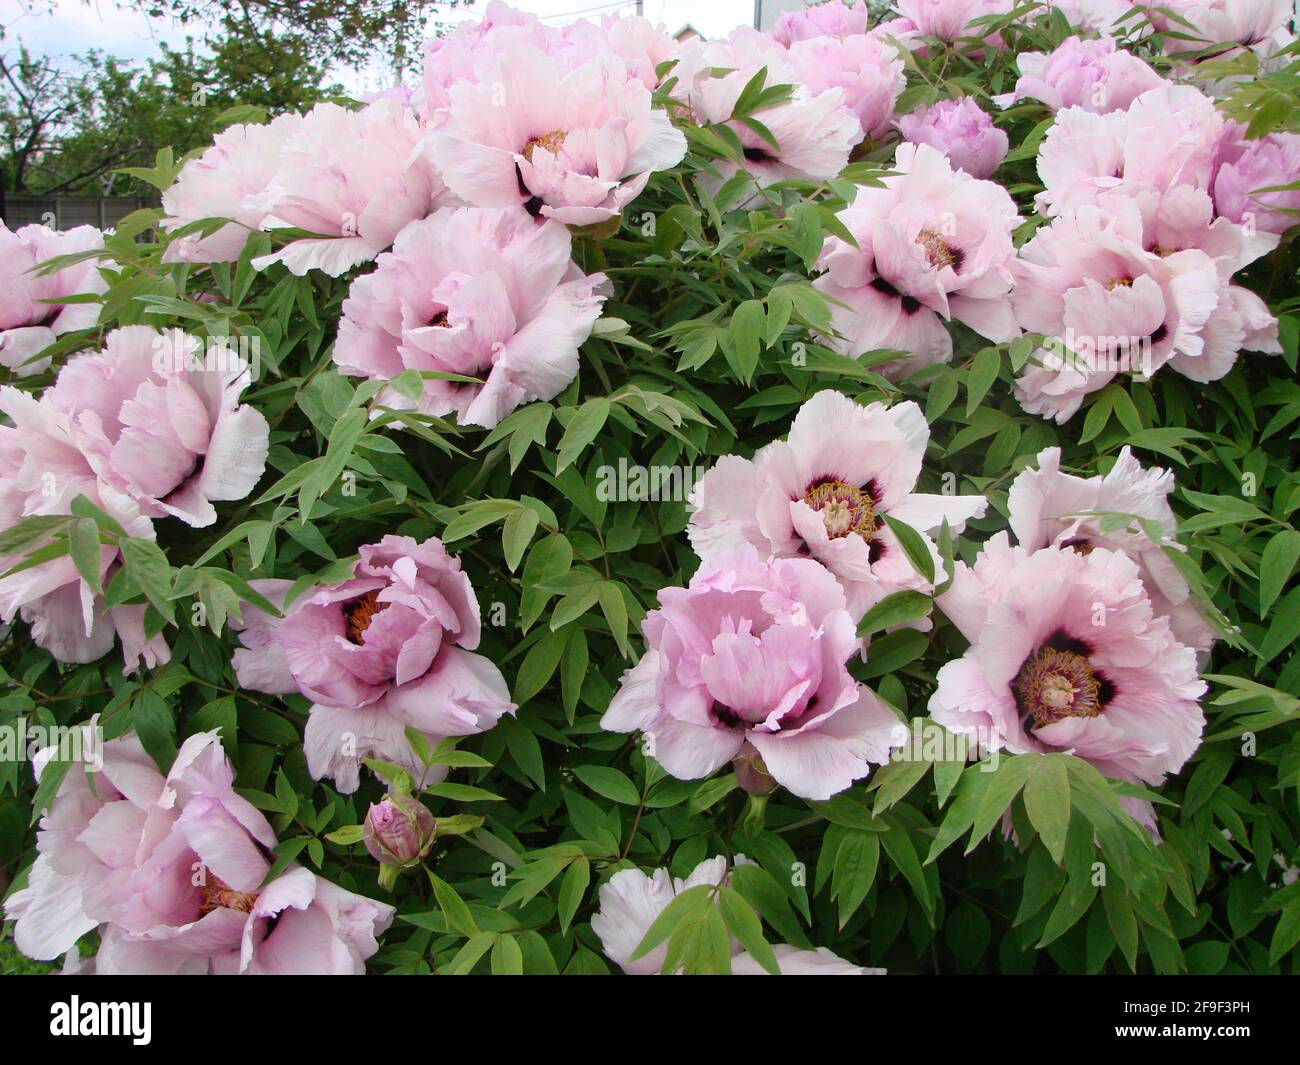 Pink Peony flower, Paeonia suffruticosa, in garden . important symbol in Chinese culture. national flower for China. Stock Photo